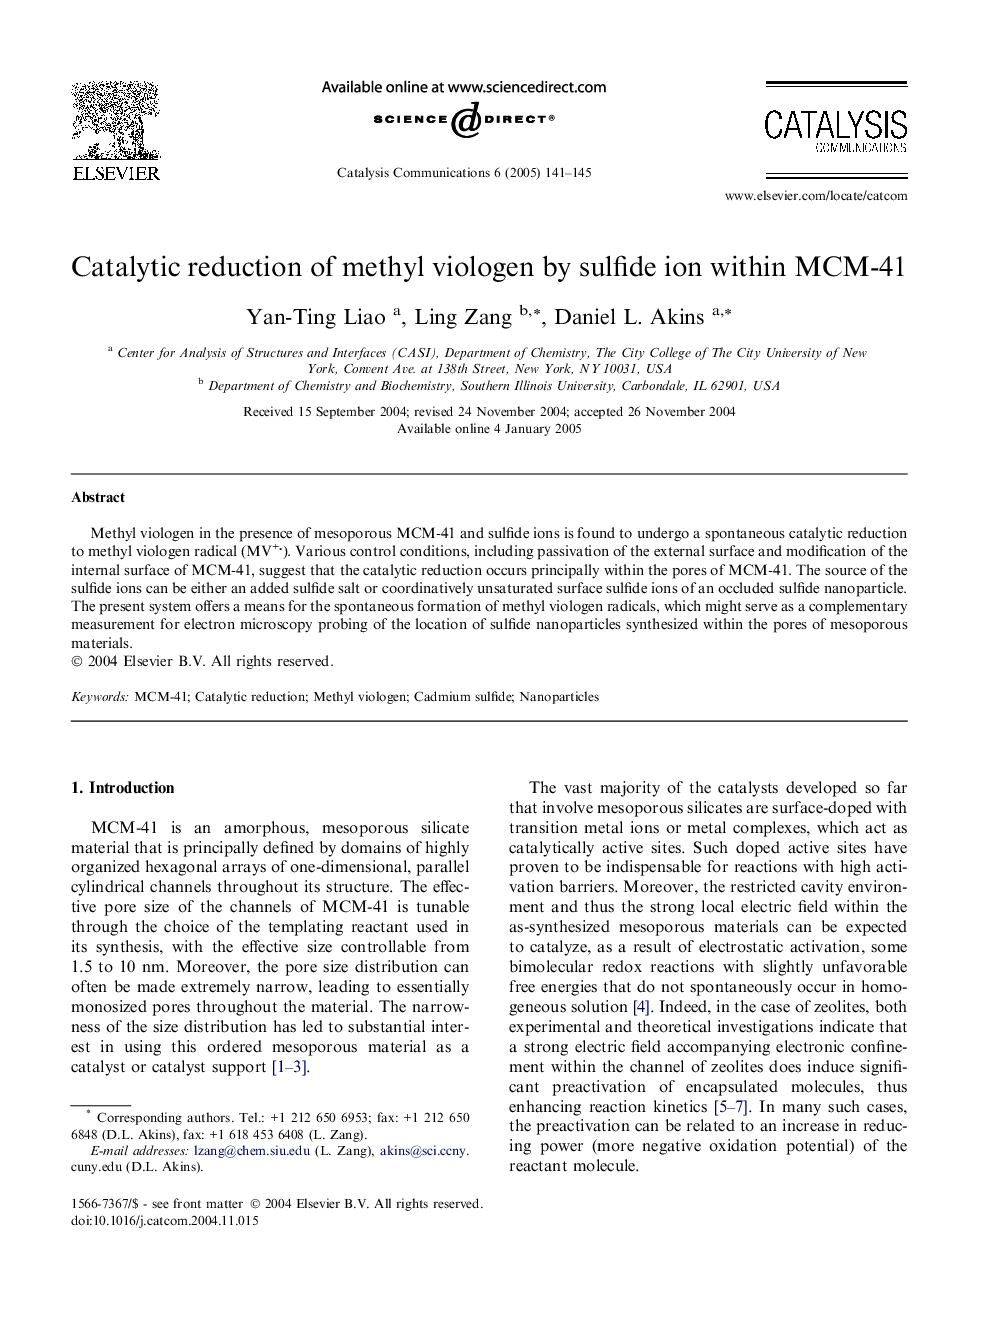 Catalytic reduction of methyl viologen by sulfide ion within MCM-41